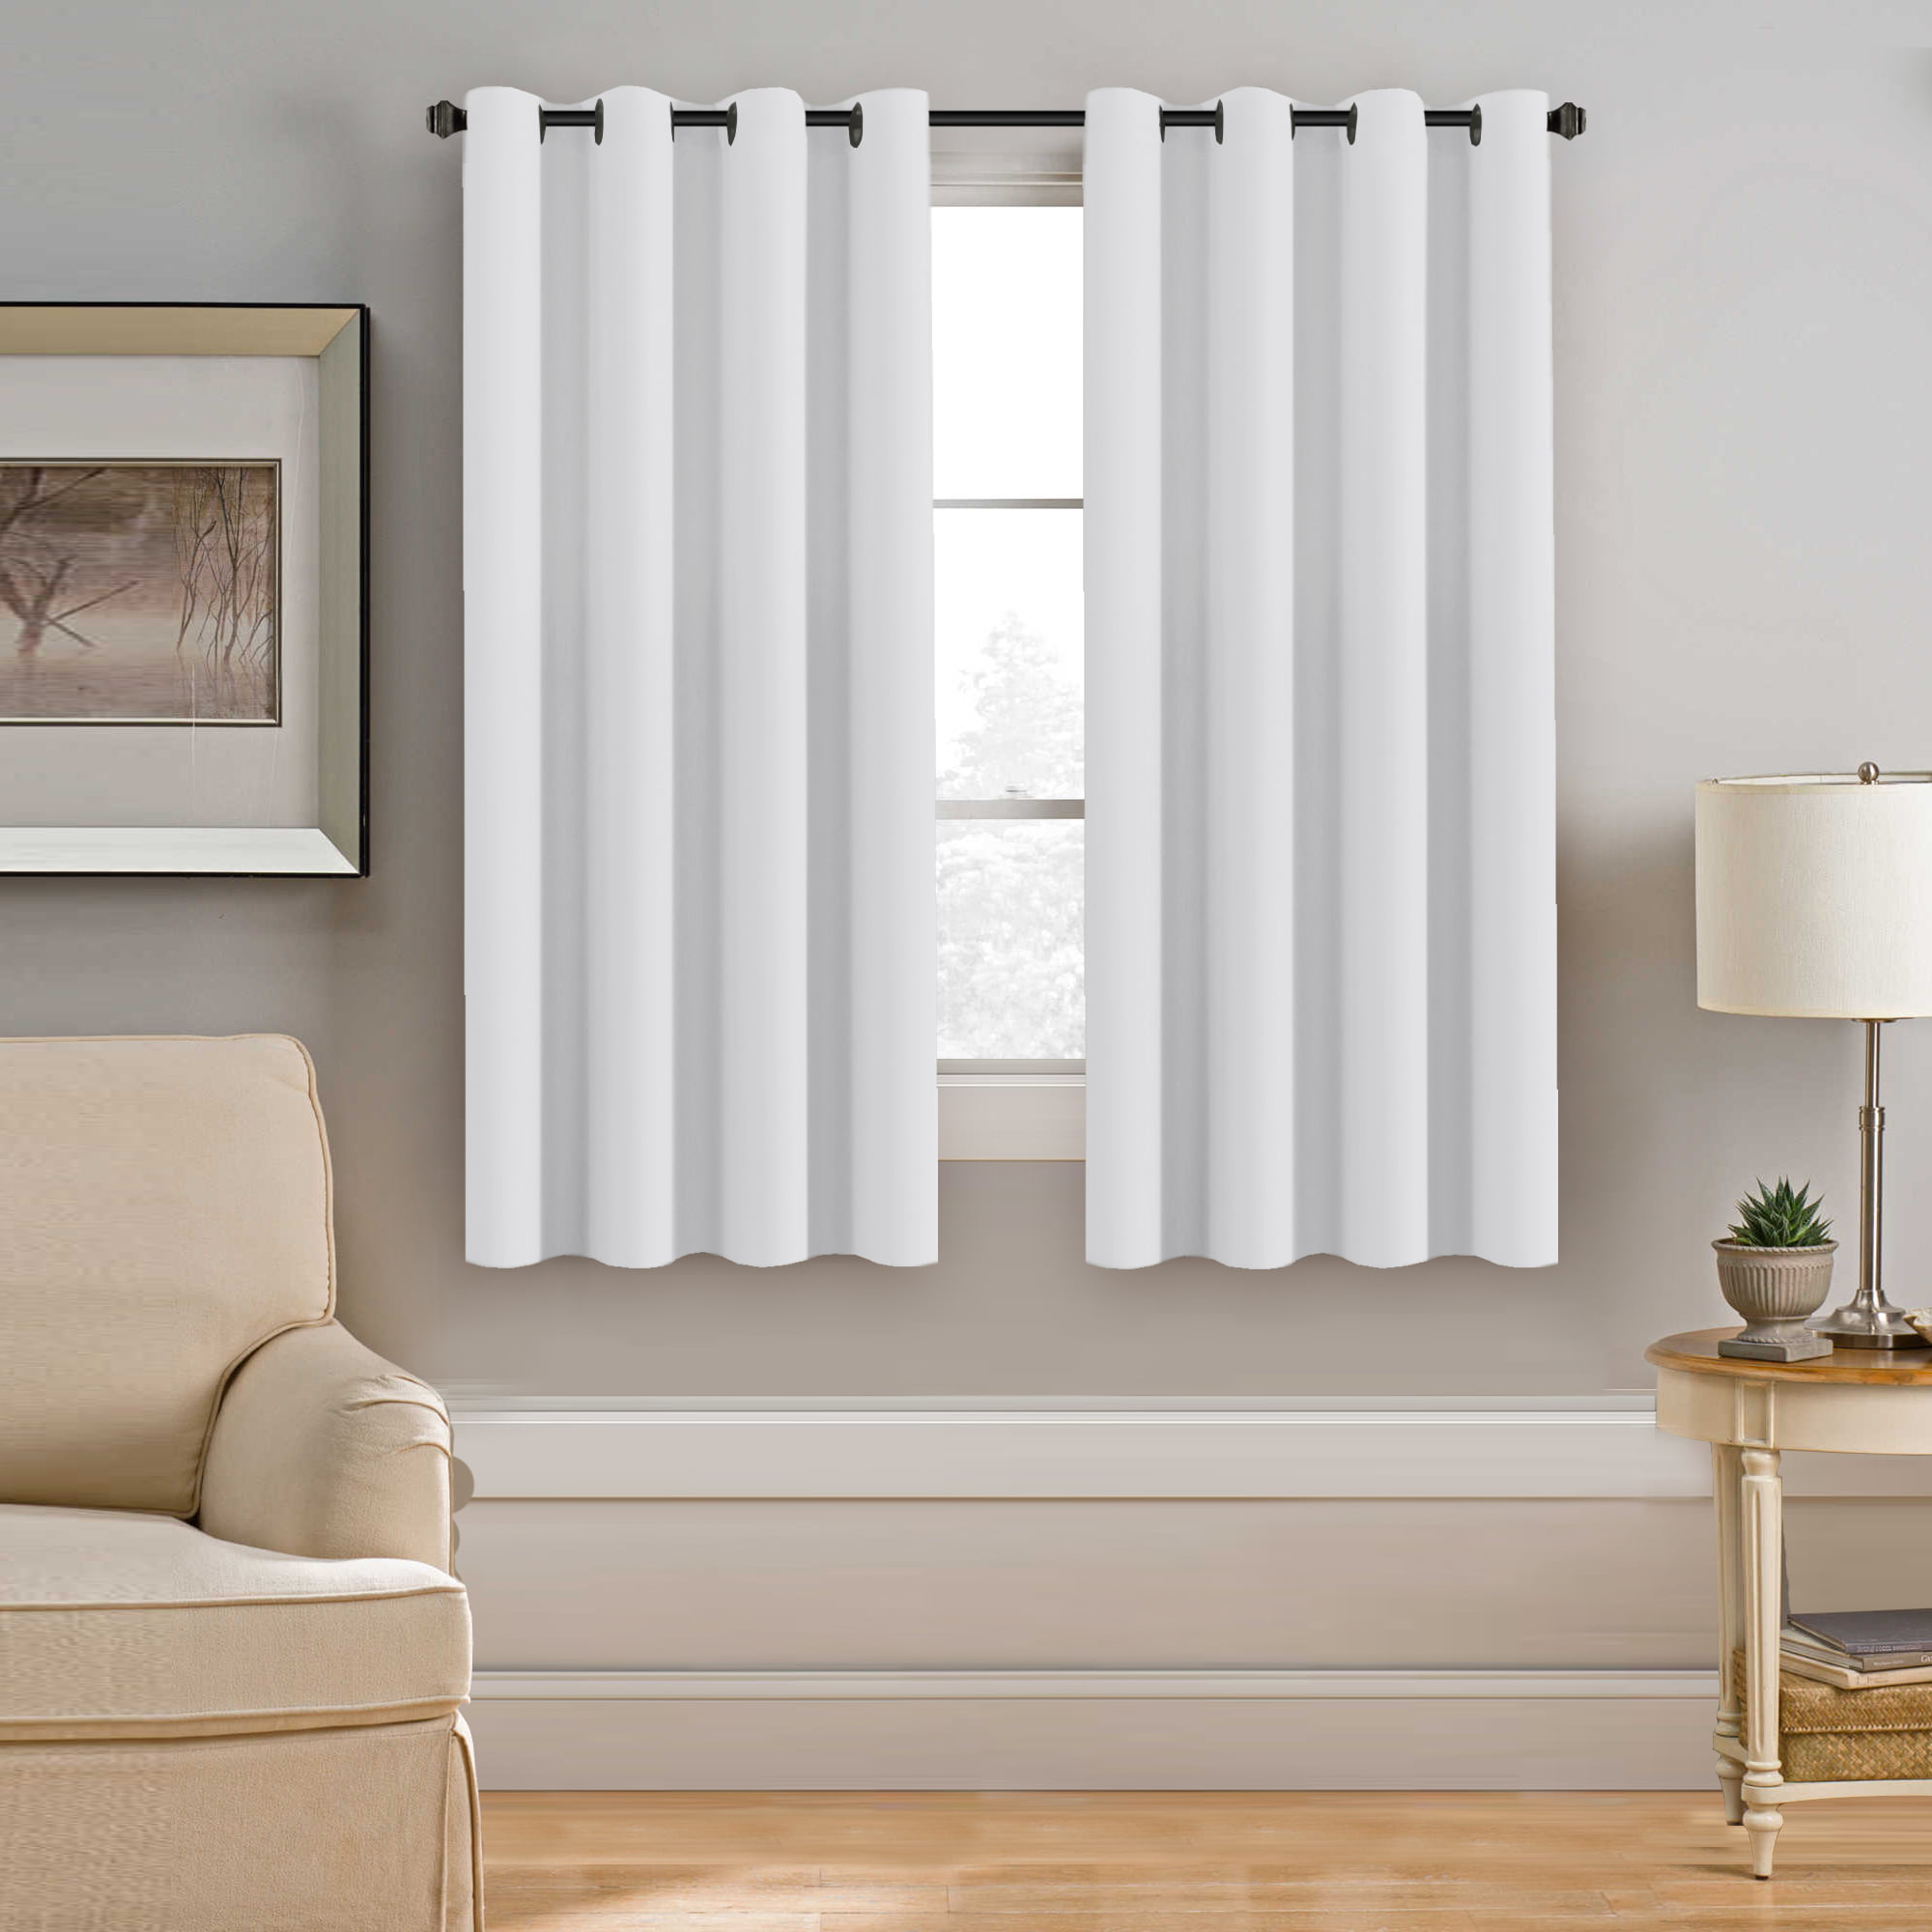 Pure White Curtain 63 inch Length Window Treatment Room Darkening Panel for Bedroom Living Room